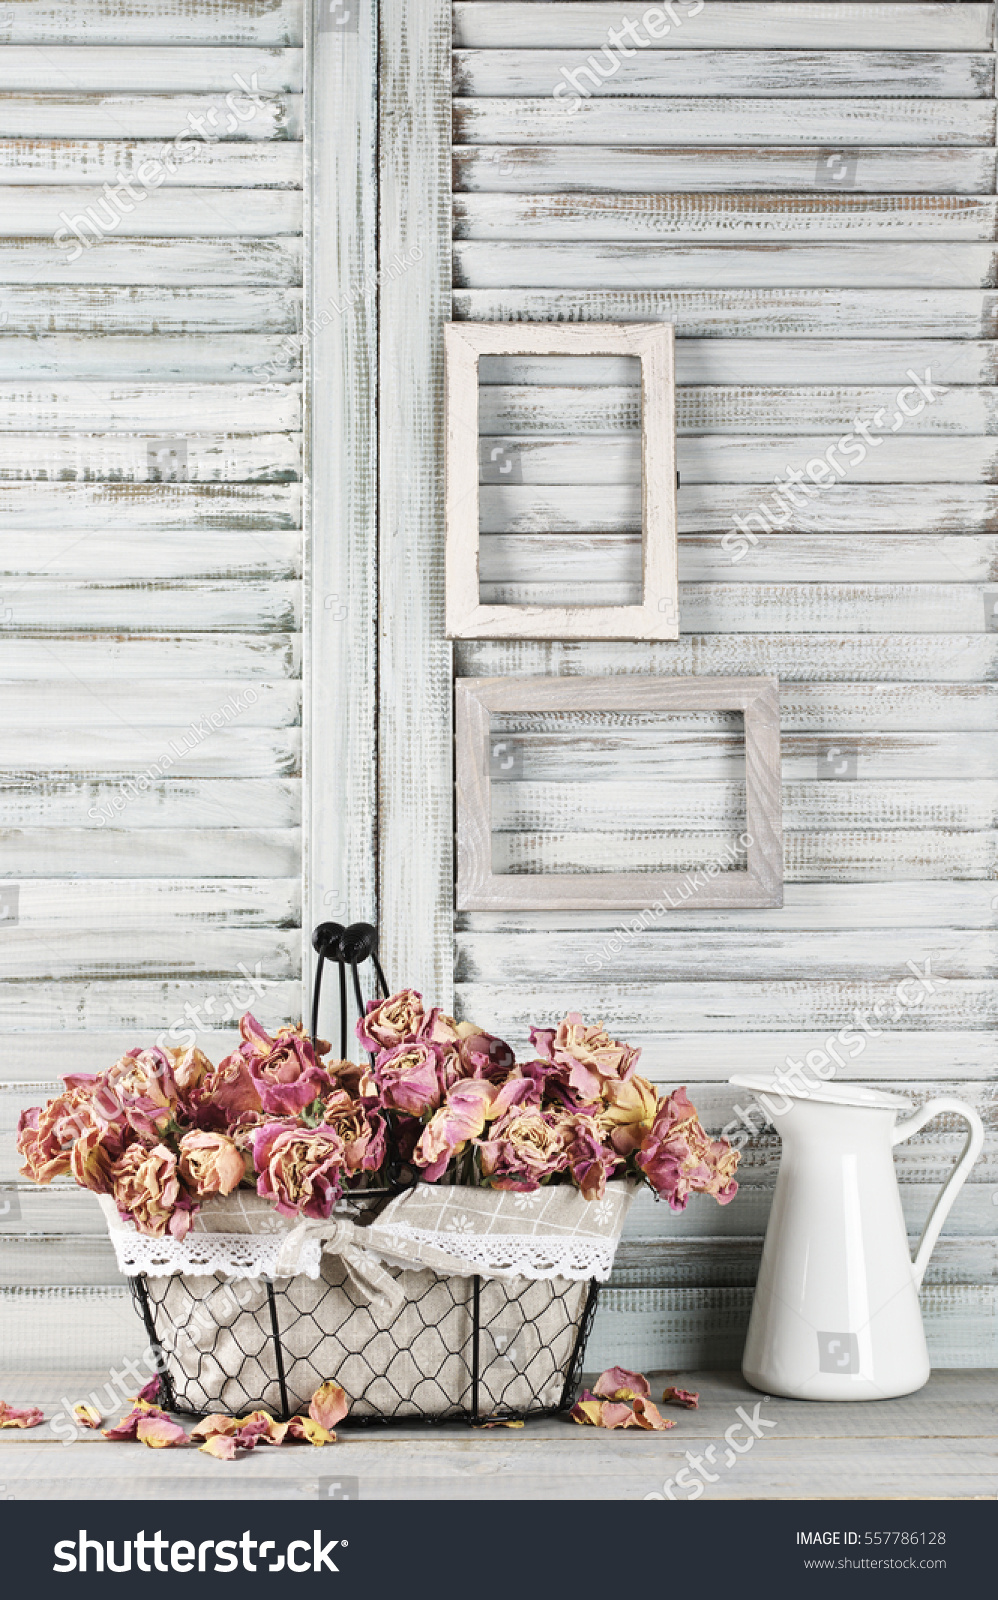 Shabby chic still life: bunch of vintage pink dry roses in wire basket and jug against white wooden blinds with empty photoframes. #557786128